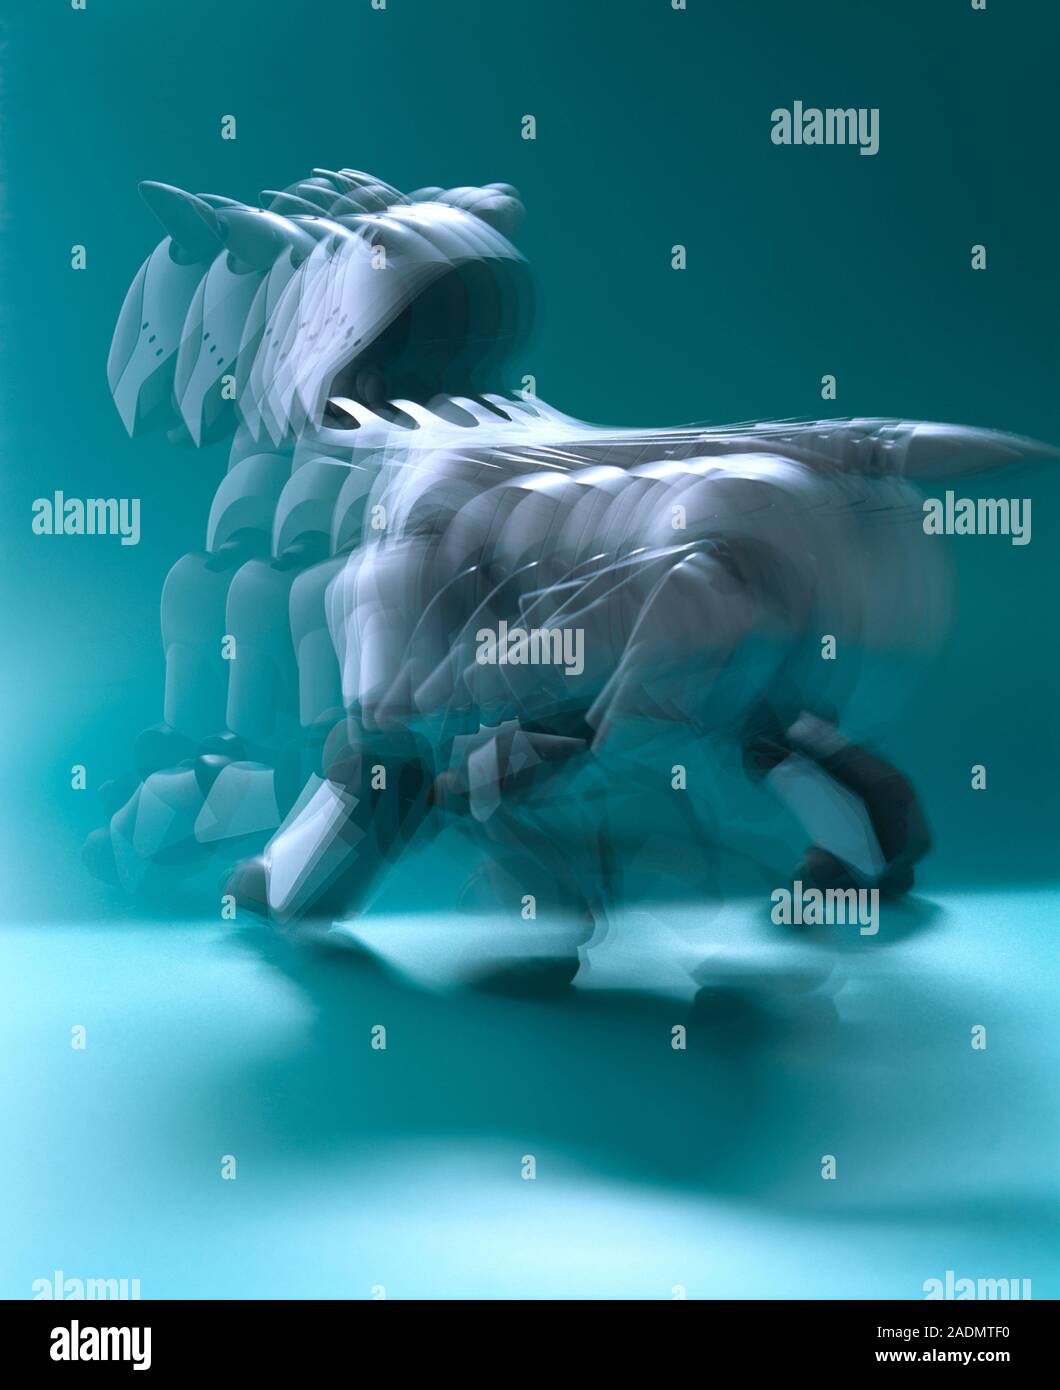 Robotic dog. Stroboscopic image of the Japanese robot dog toy AIBO (Artificial Intelligence Robot) walking. AIBO is also Japanese for buddy. The robot Stock Photo